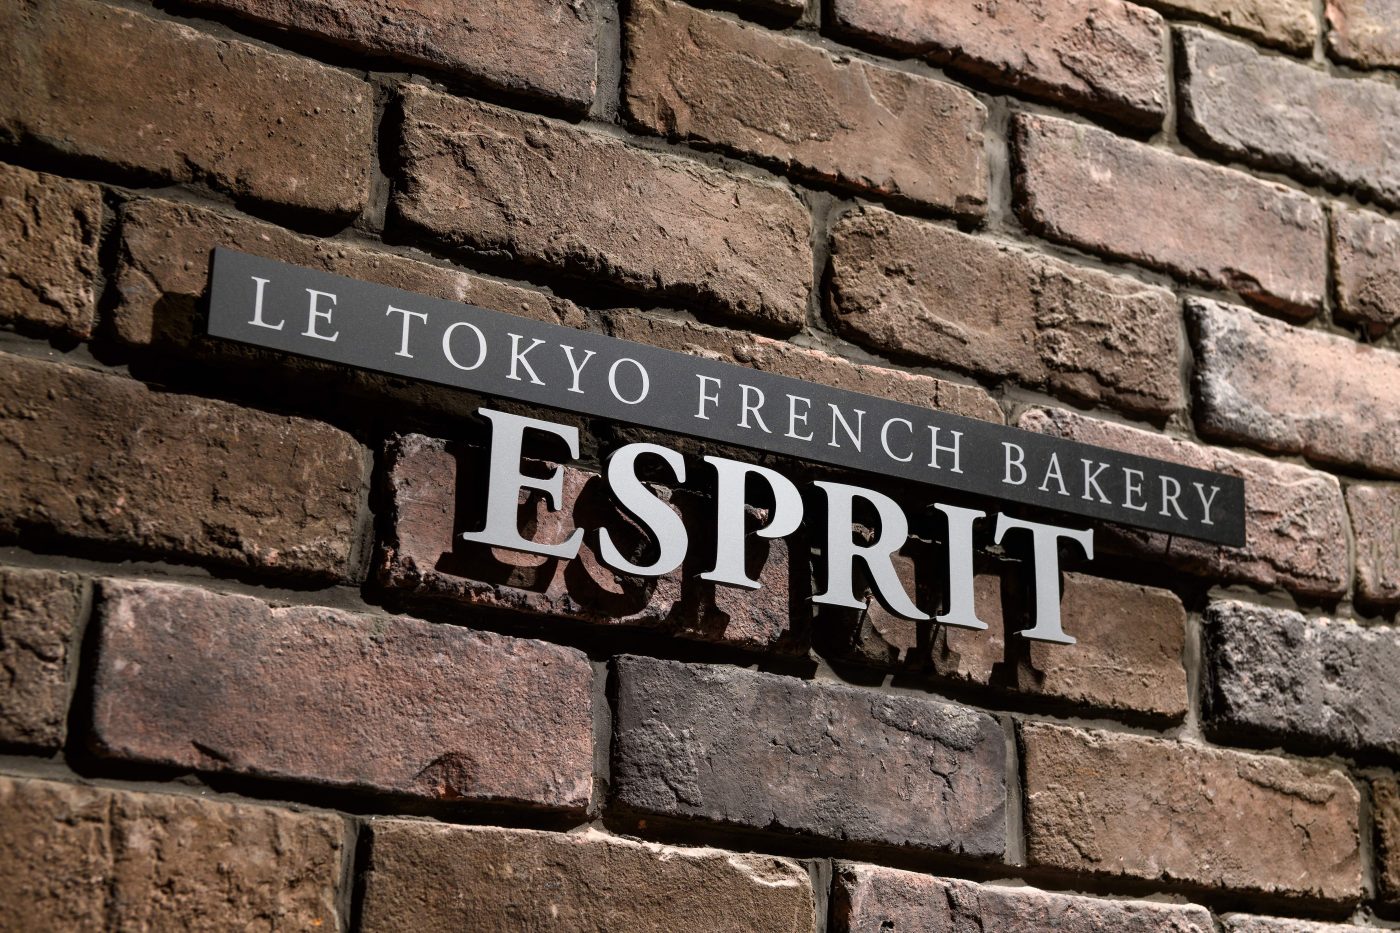 LE TOKYO FRENCH BAKERY ESPRIT